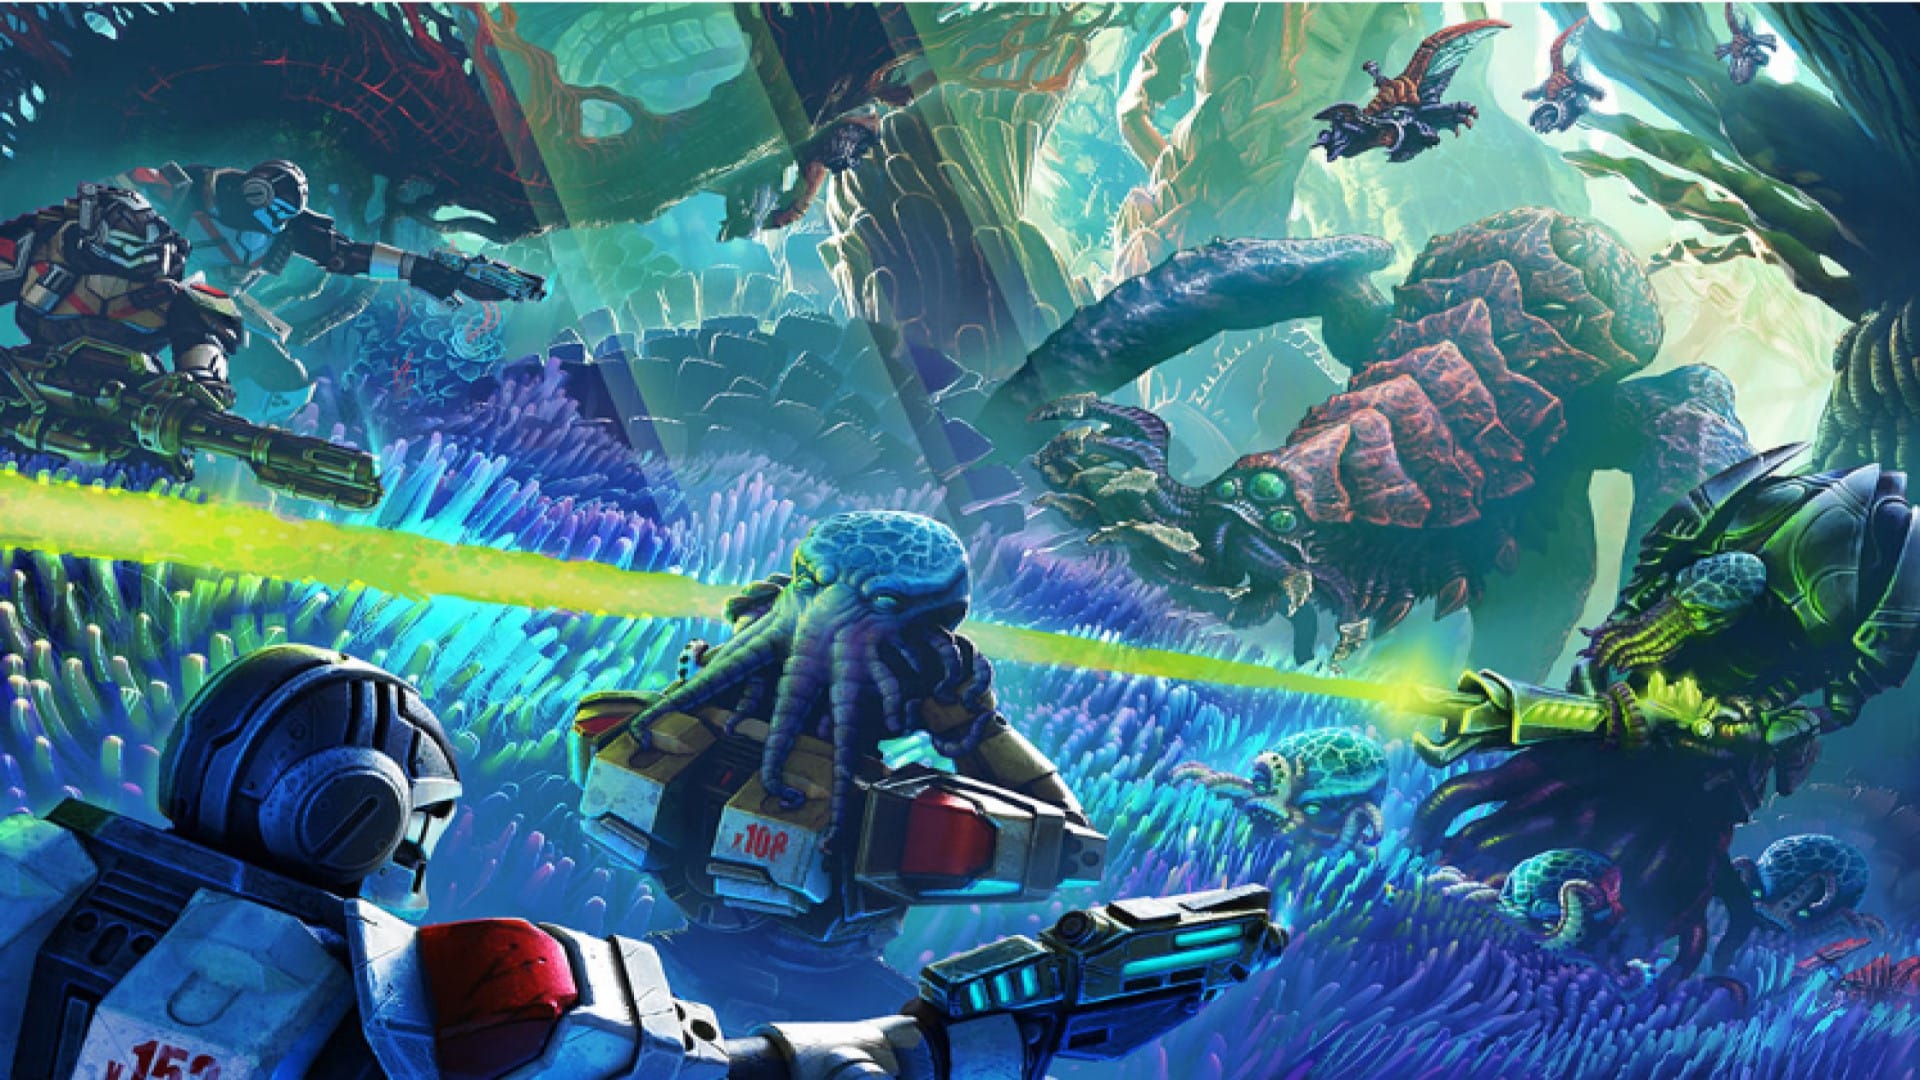 A bunch of soldiers in space armor fighting giant bugs and tentacled monsters